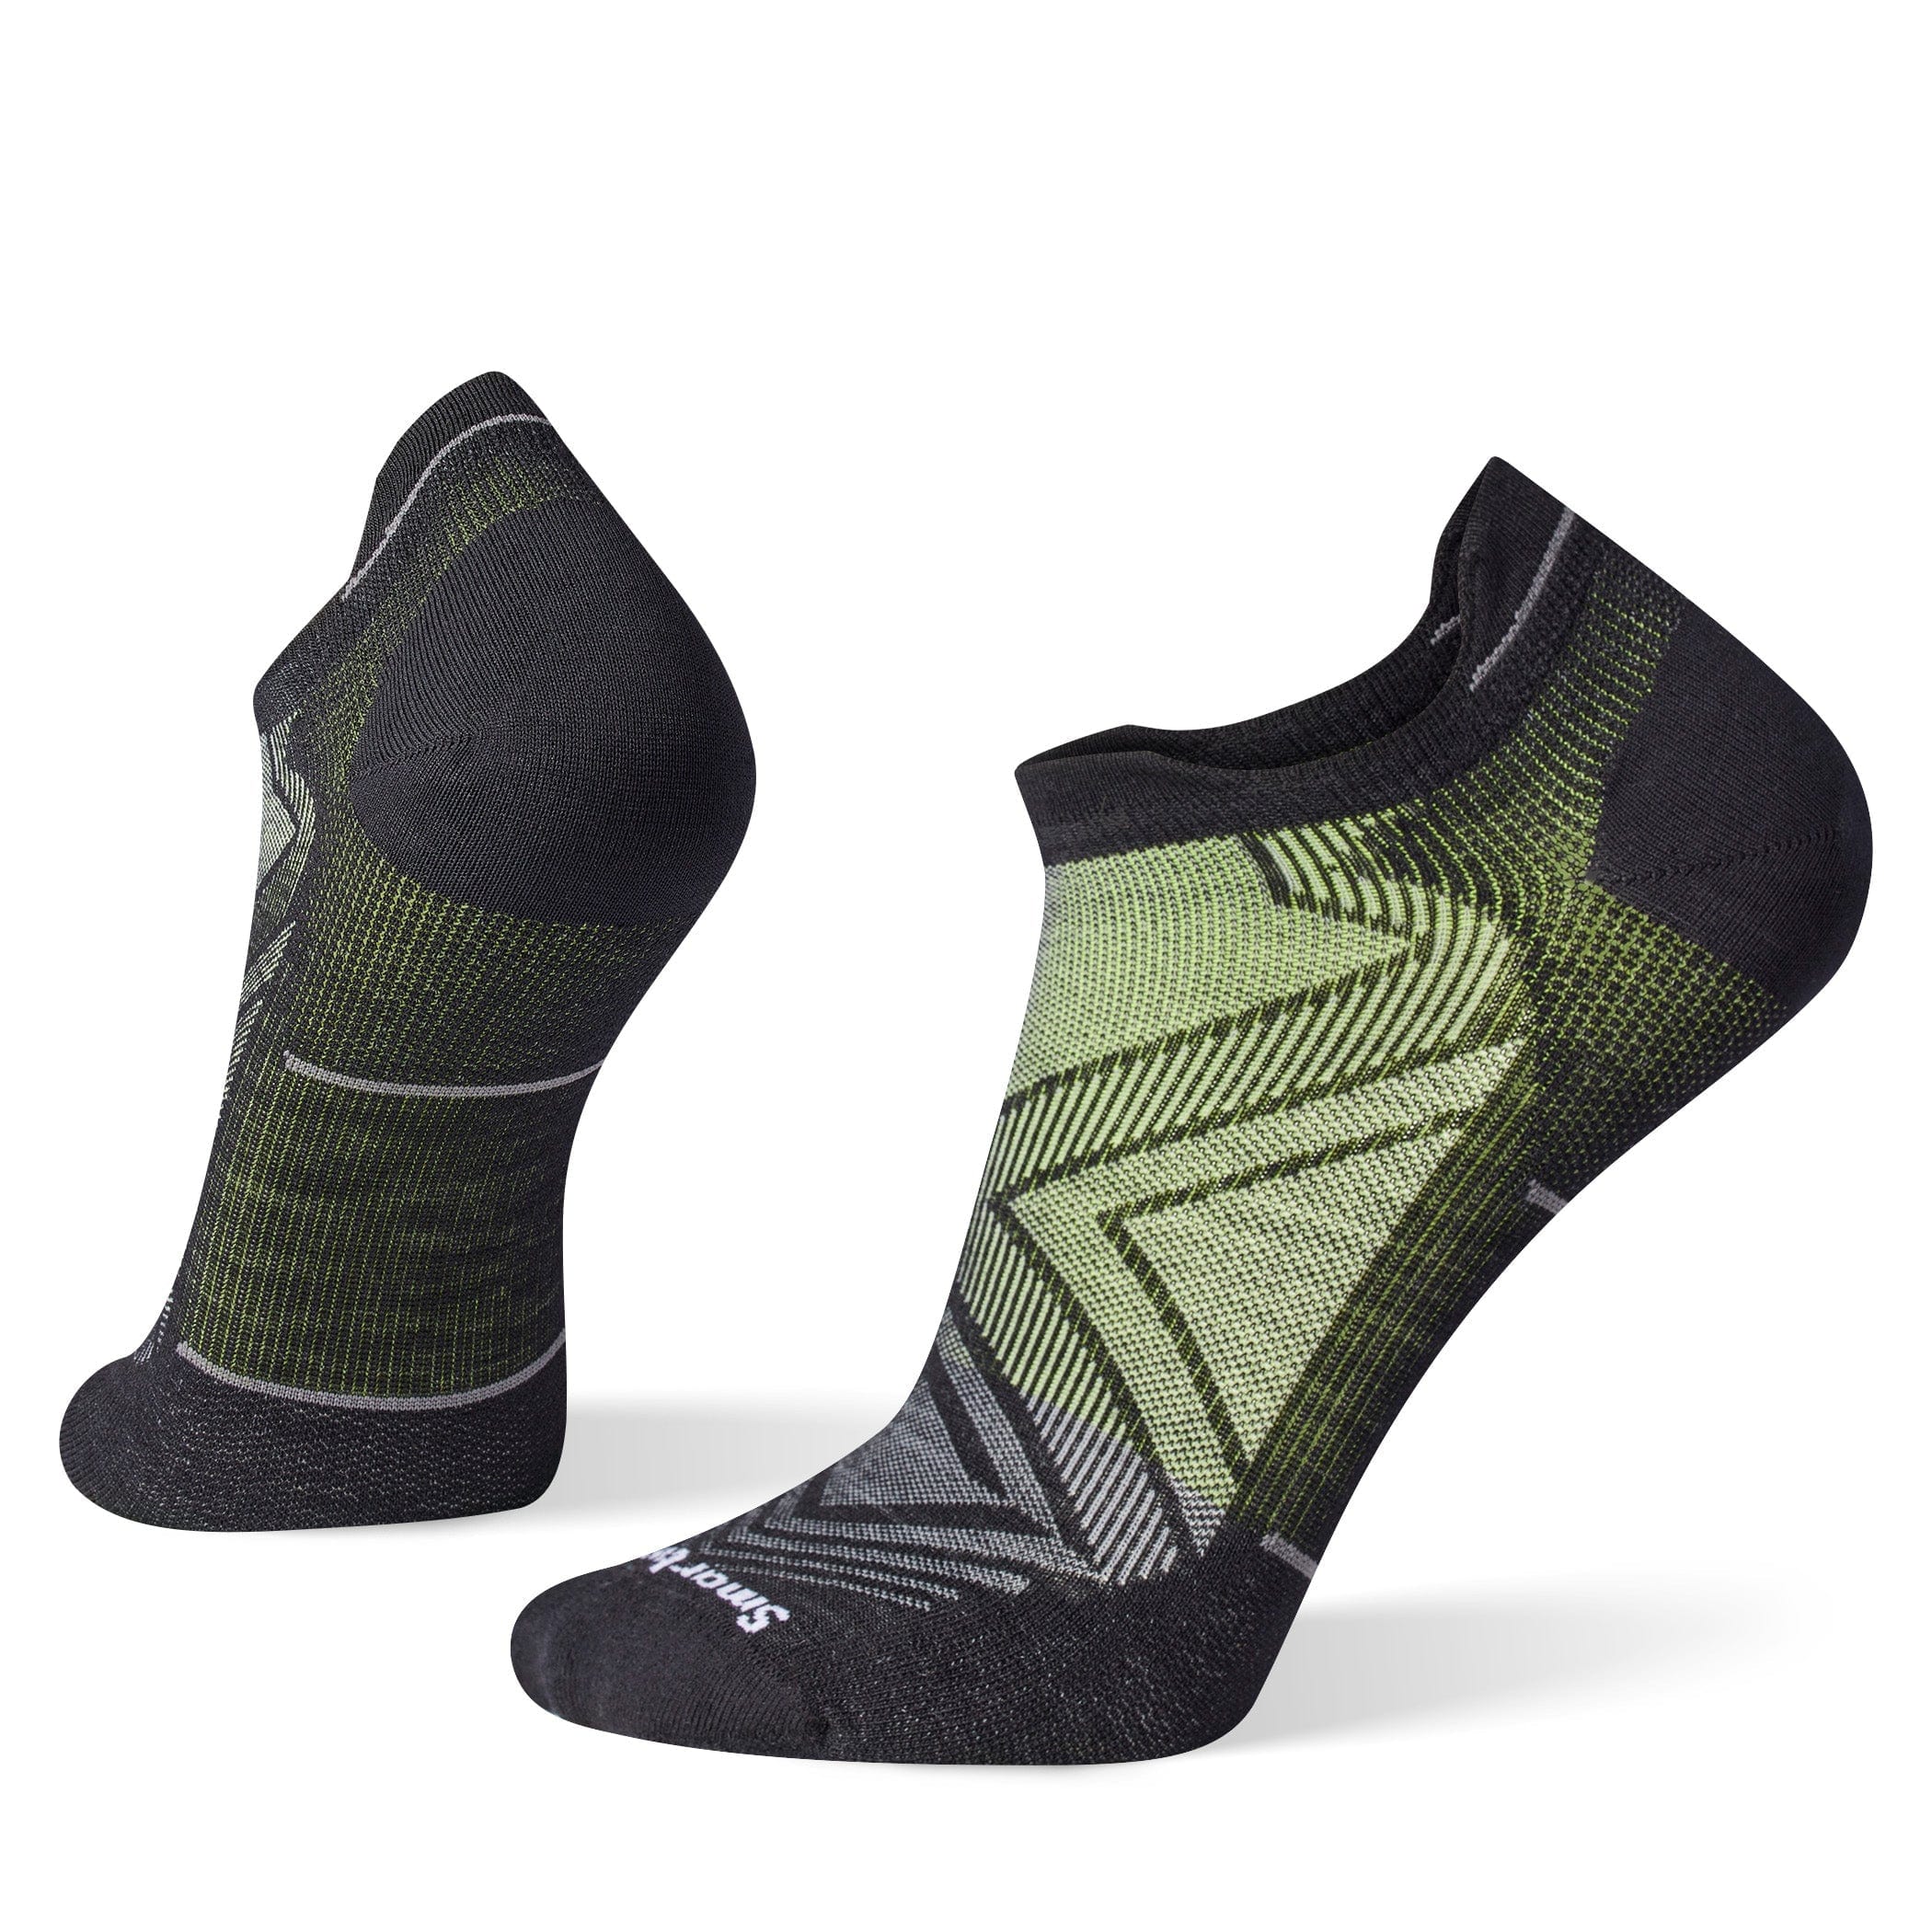 Smartwool PhD® Socks with Indestructawool Technology 